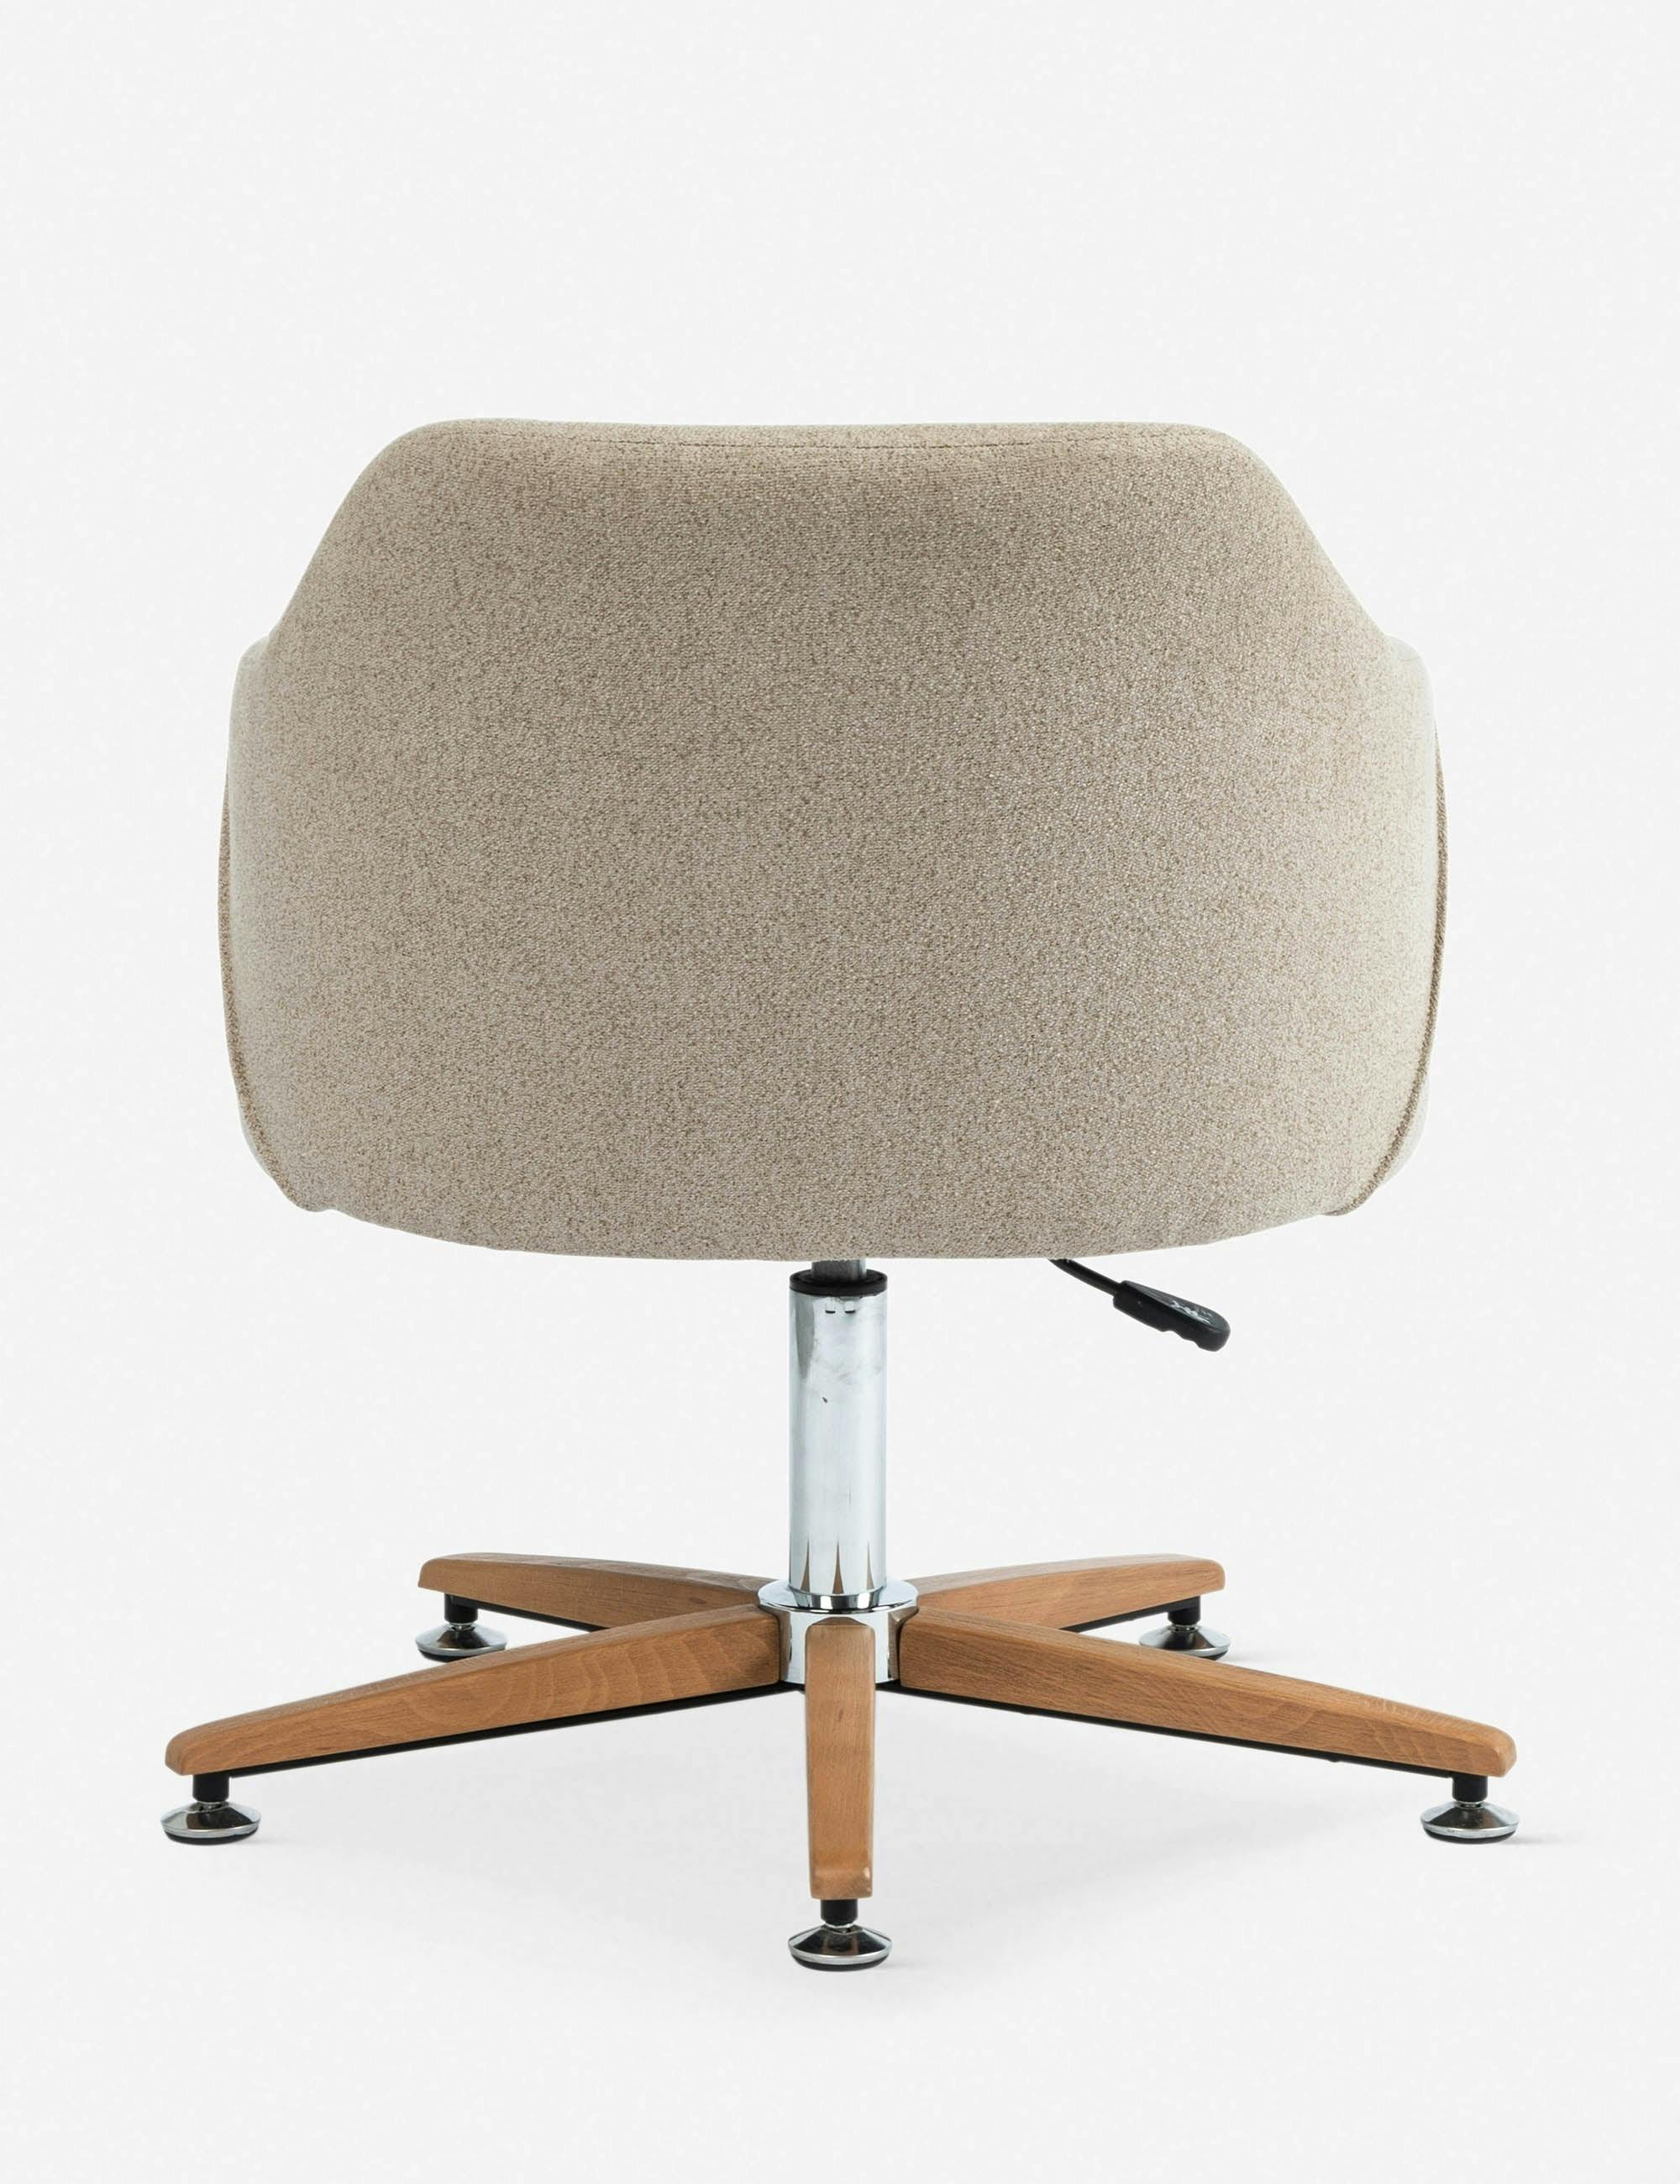 Edna Fedora Oatmeal Adjustable Swivel Task Chair in Brown Leather